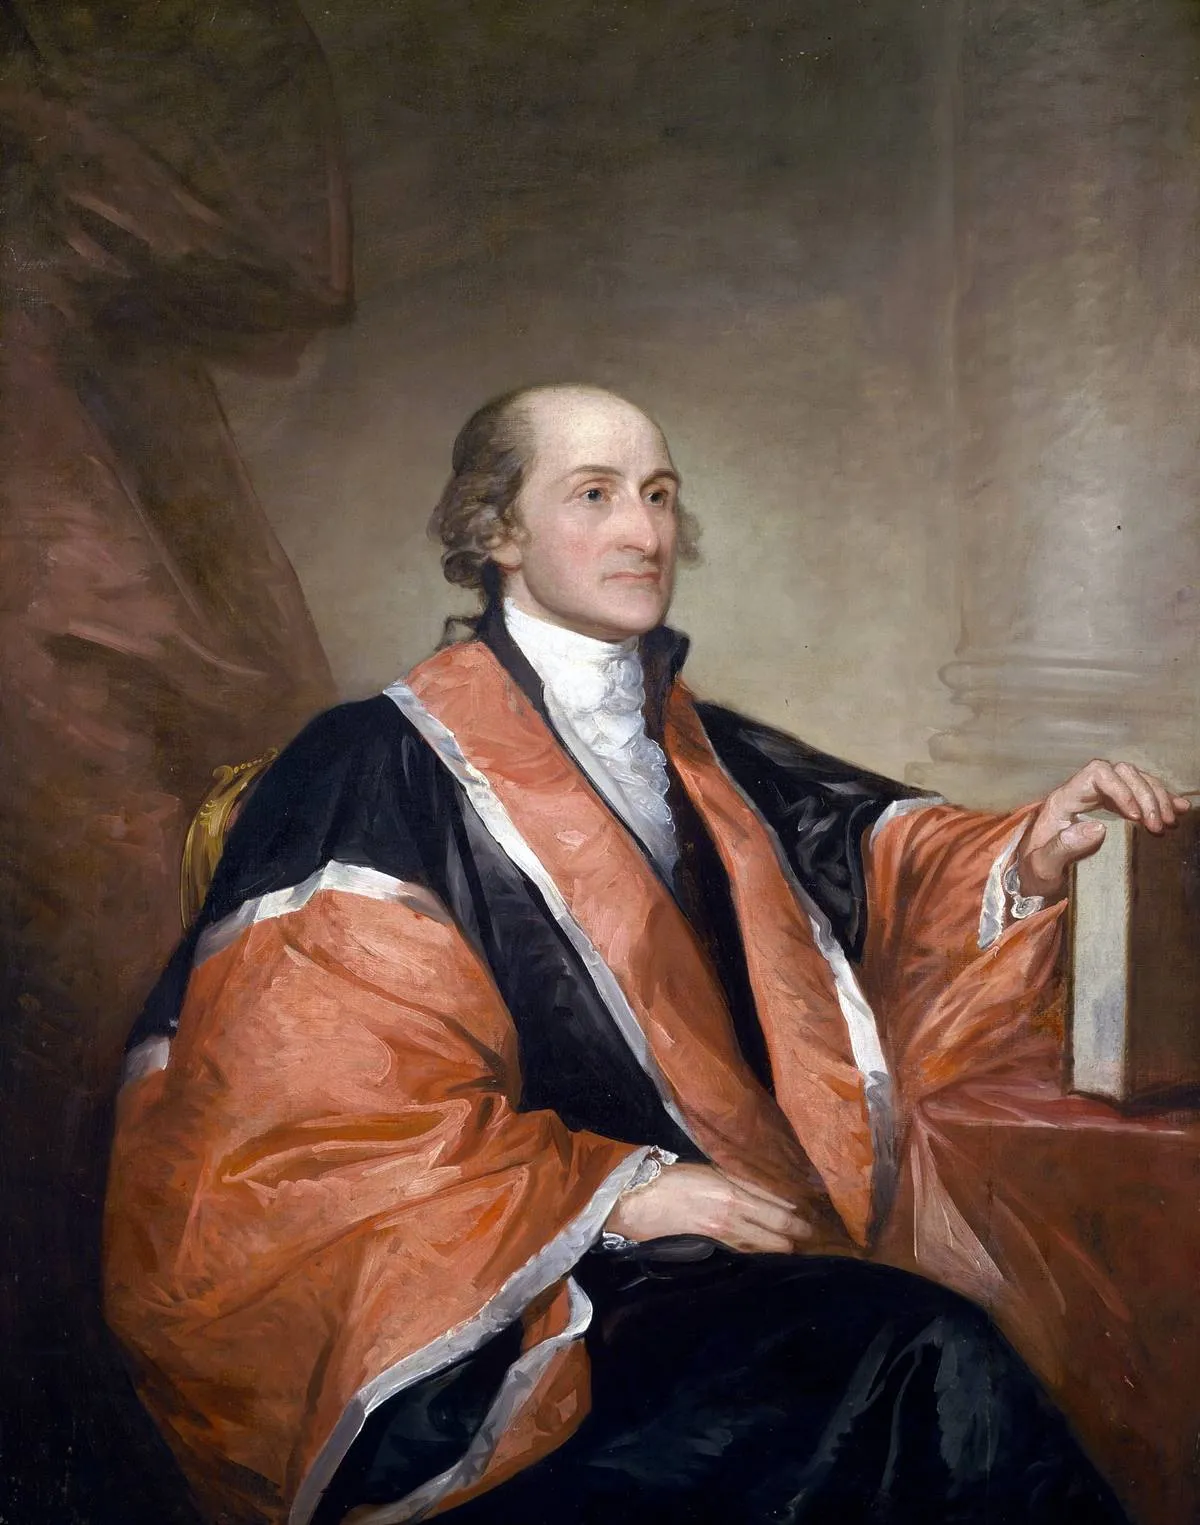 Portrait of John Jay (1745-1829) an American statesman, patriot, diplomat, one of the founding fathers and the first Chief Justice of the United States of America